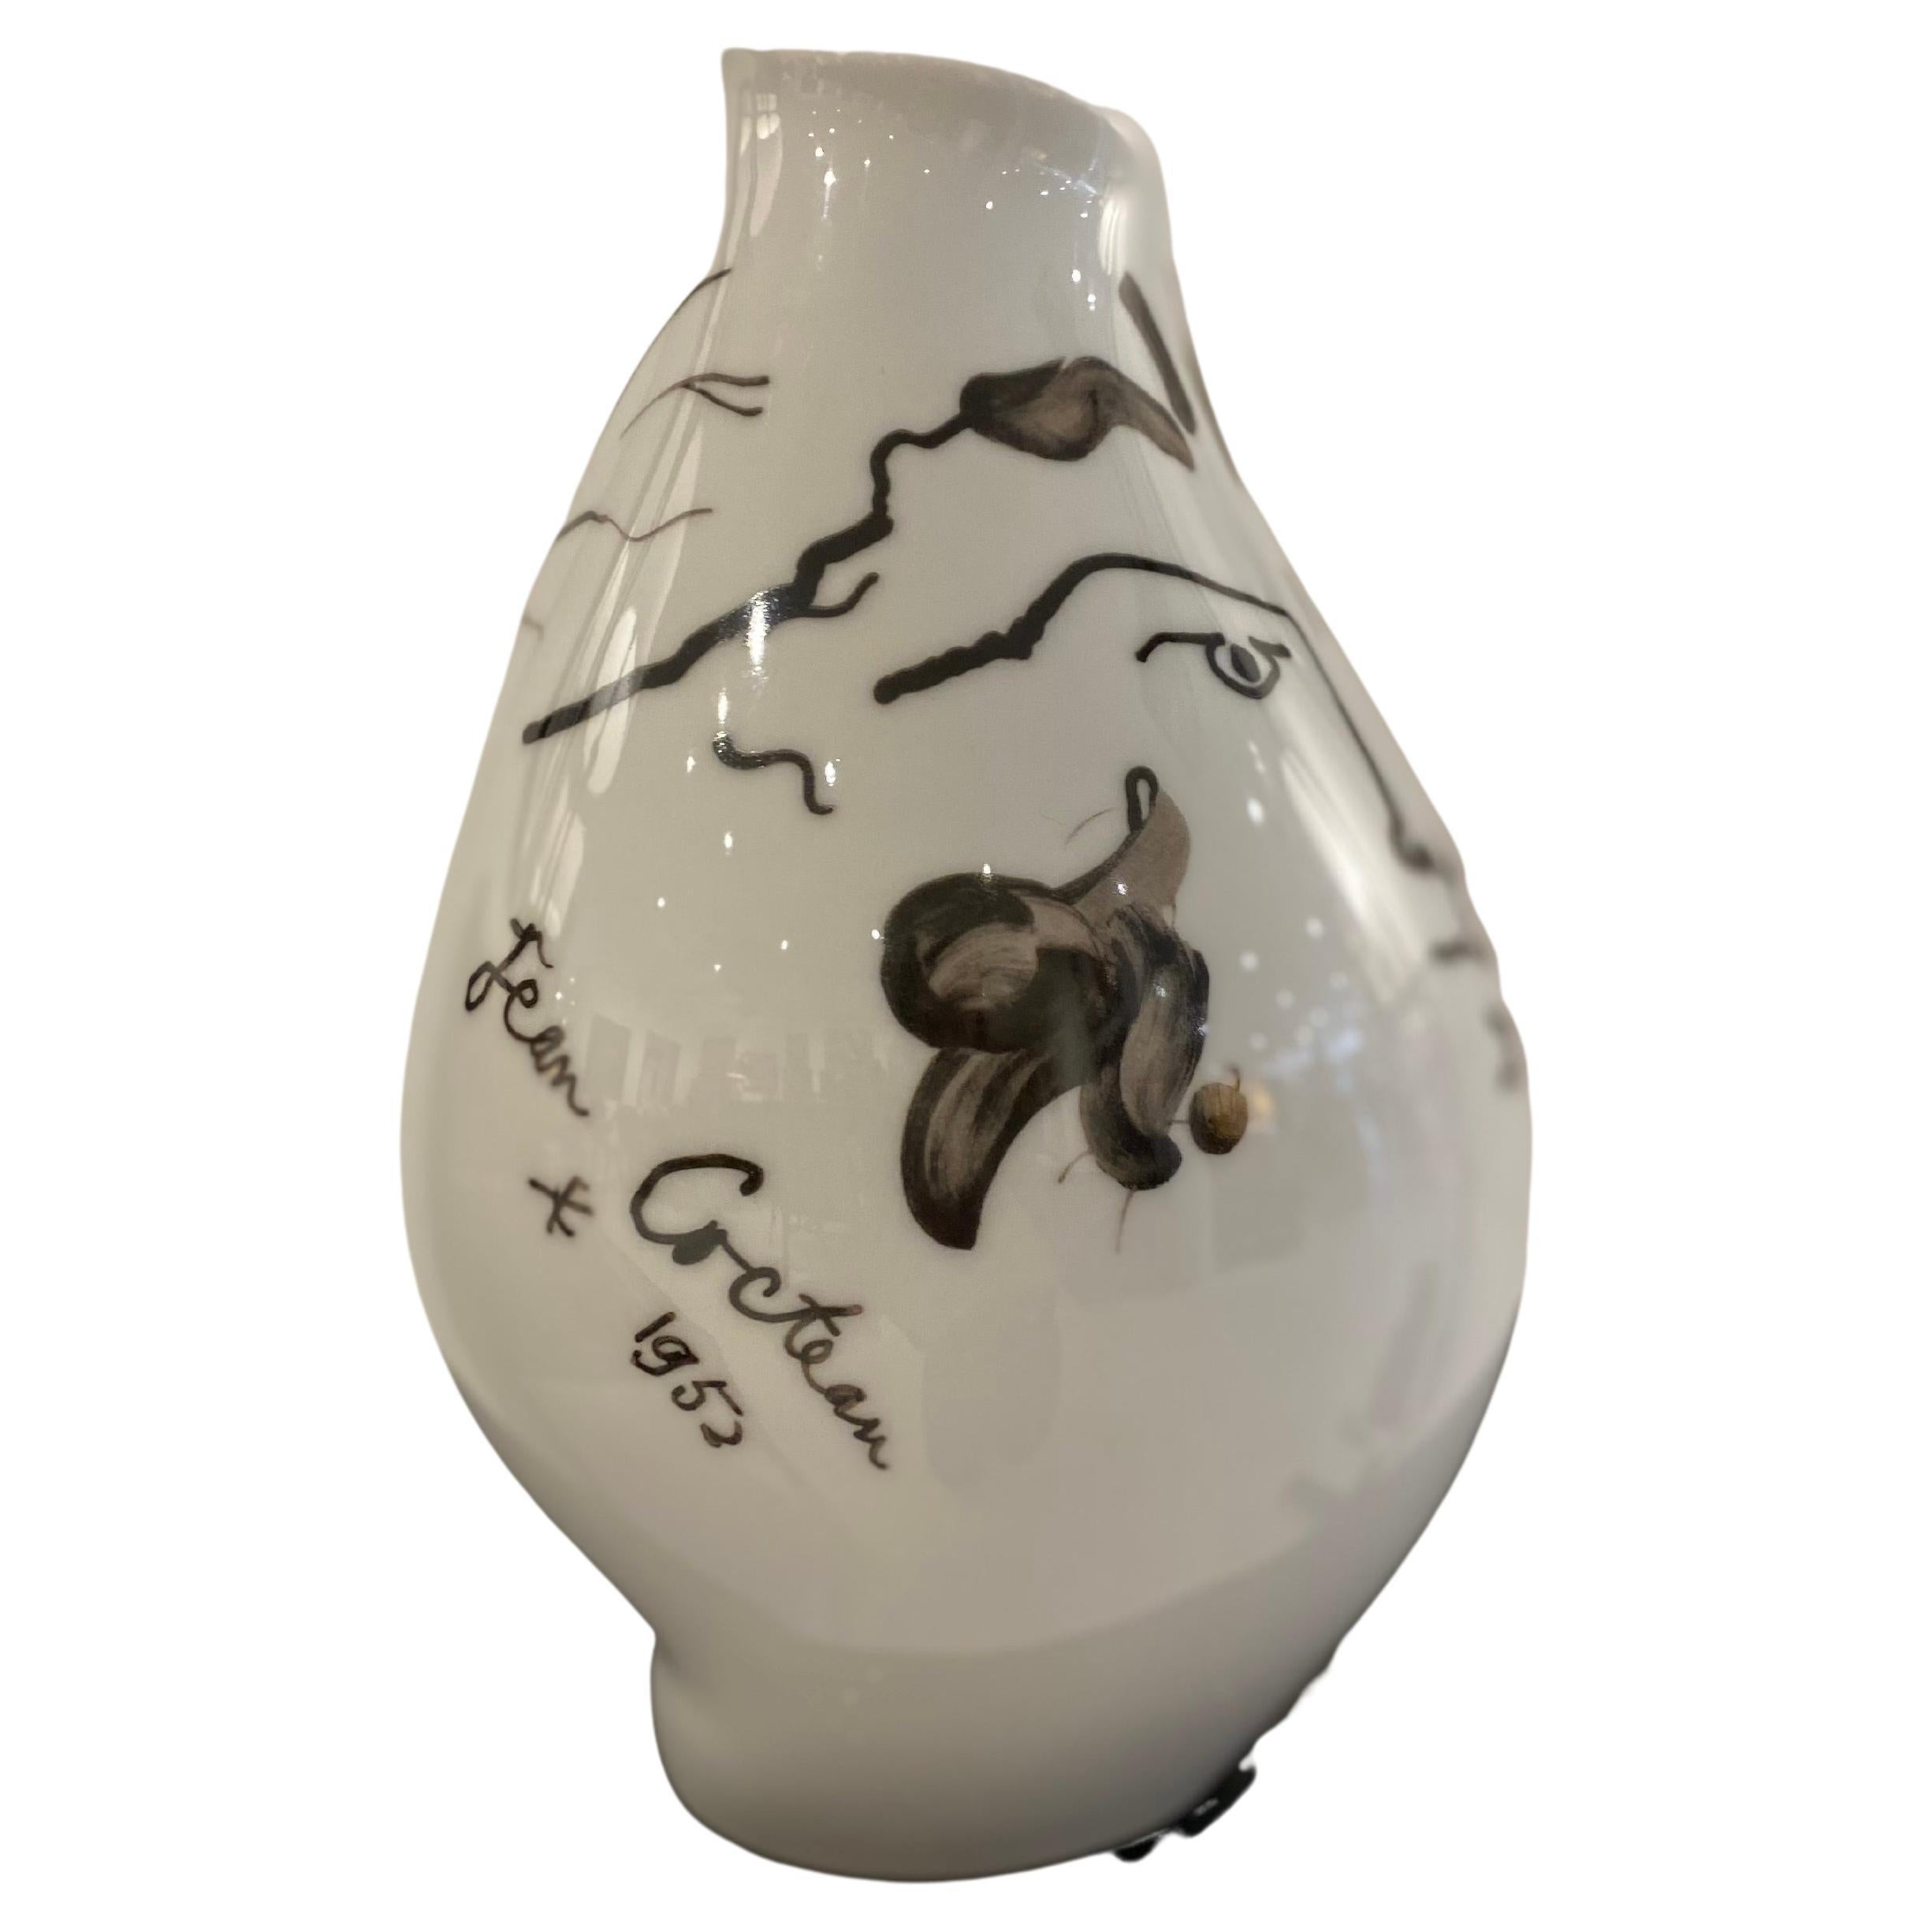 This is beautiful porcelain vase designed by Jean Cocteau for Rosenthal. The piece is in overall wonderful condition. The use and implication of irregular shapes throughout the piece is a quintessential aspect of Cocteau's work. The freeform vase